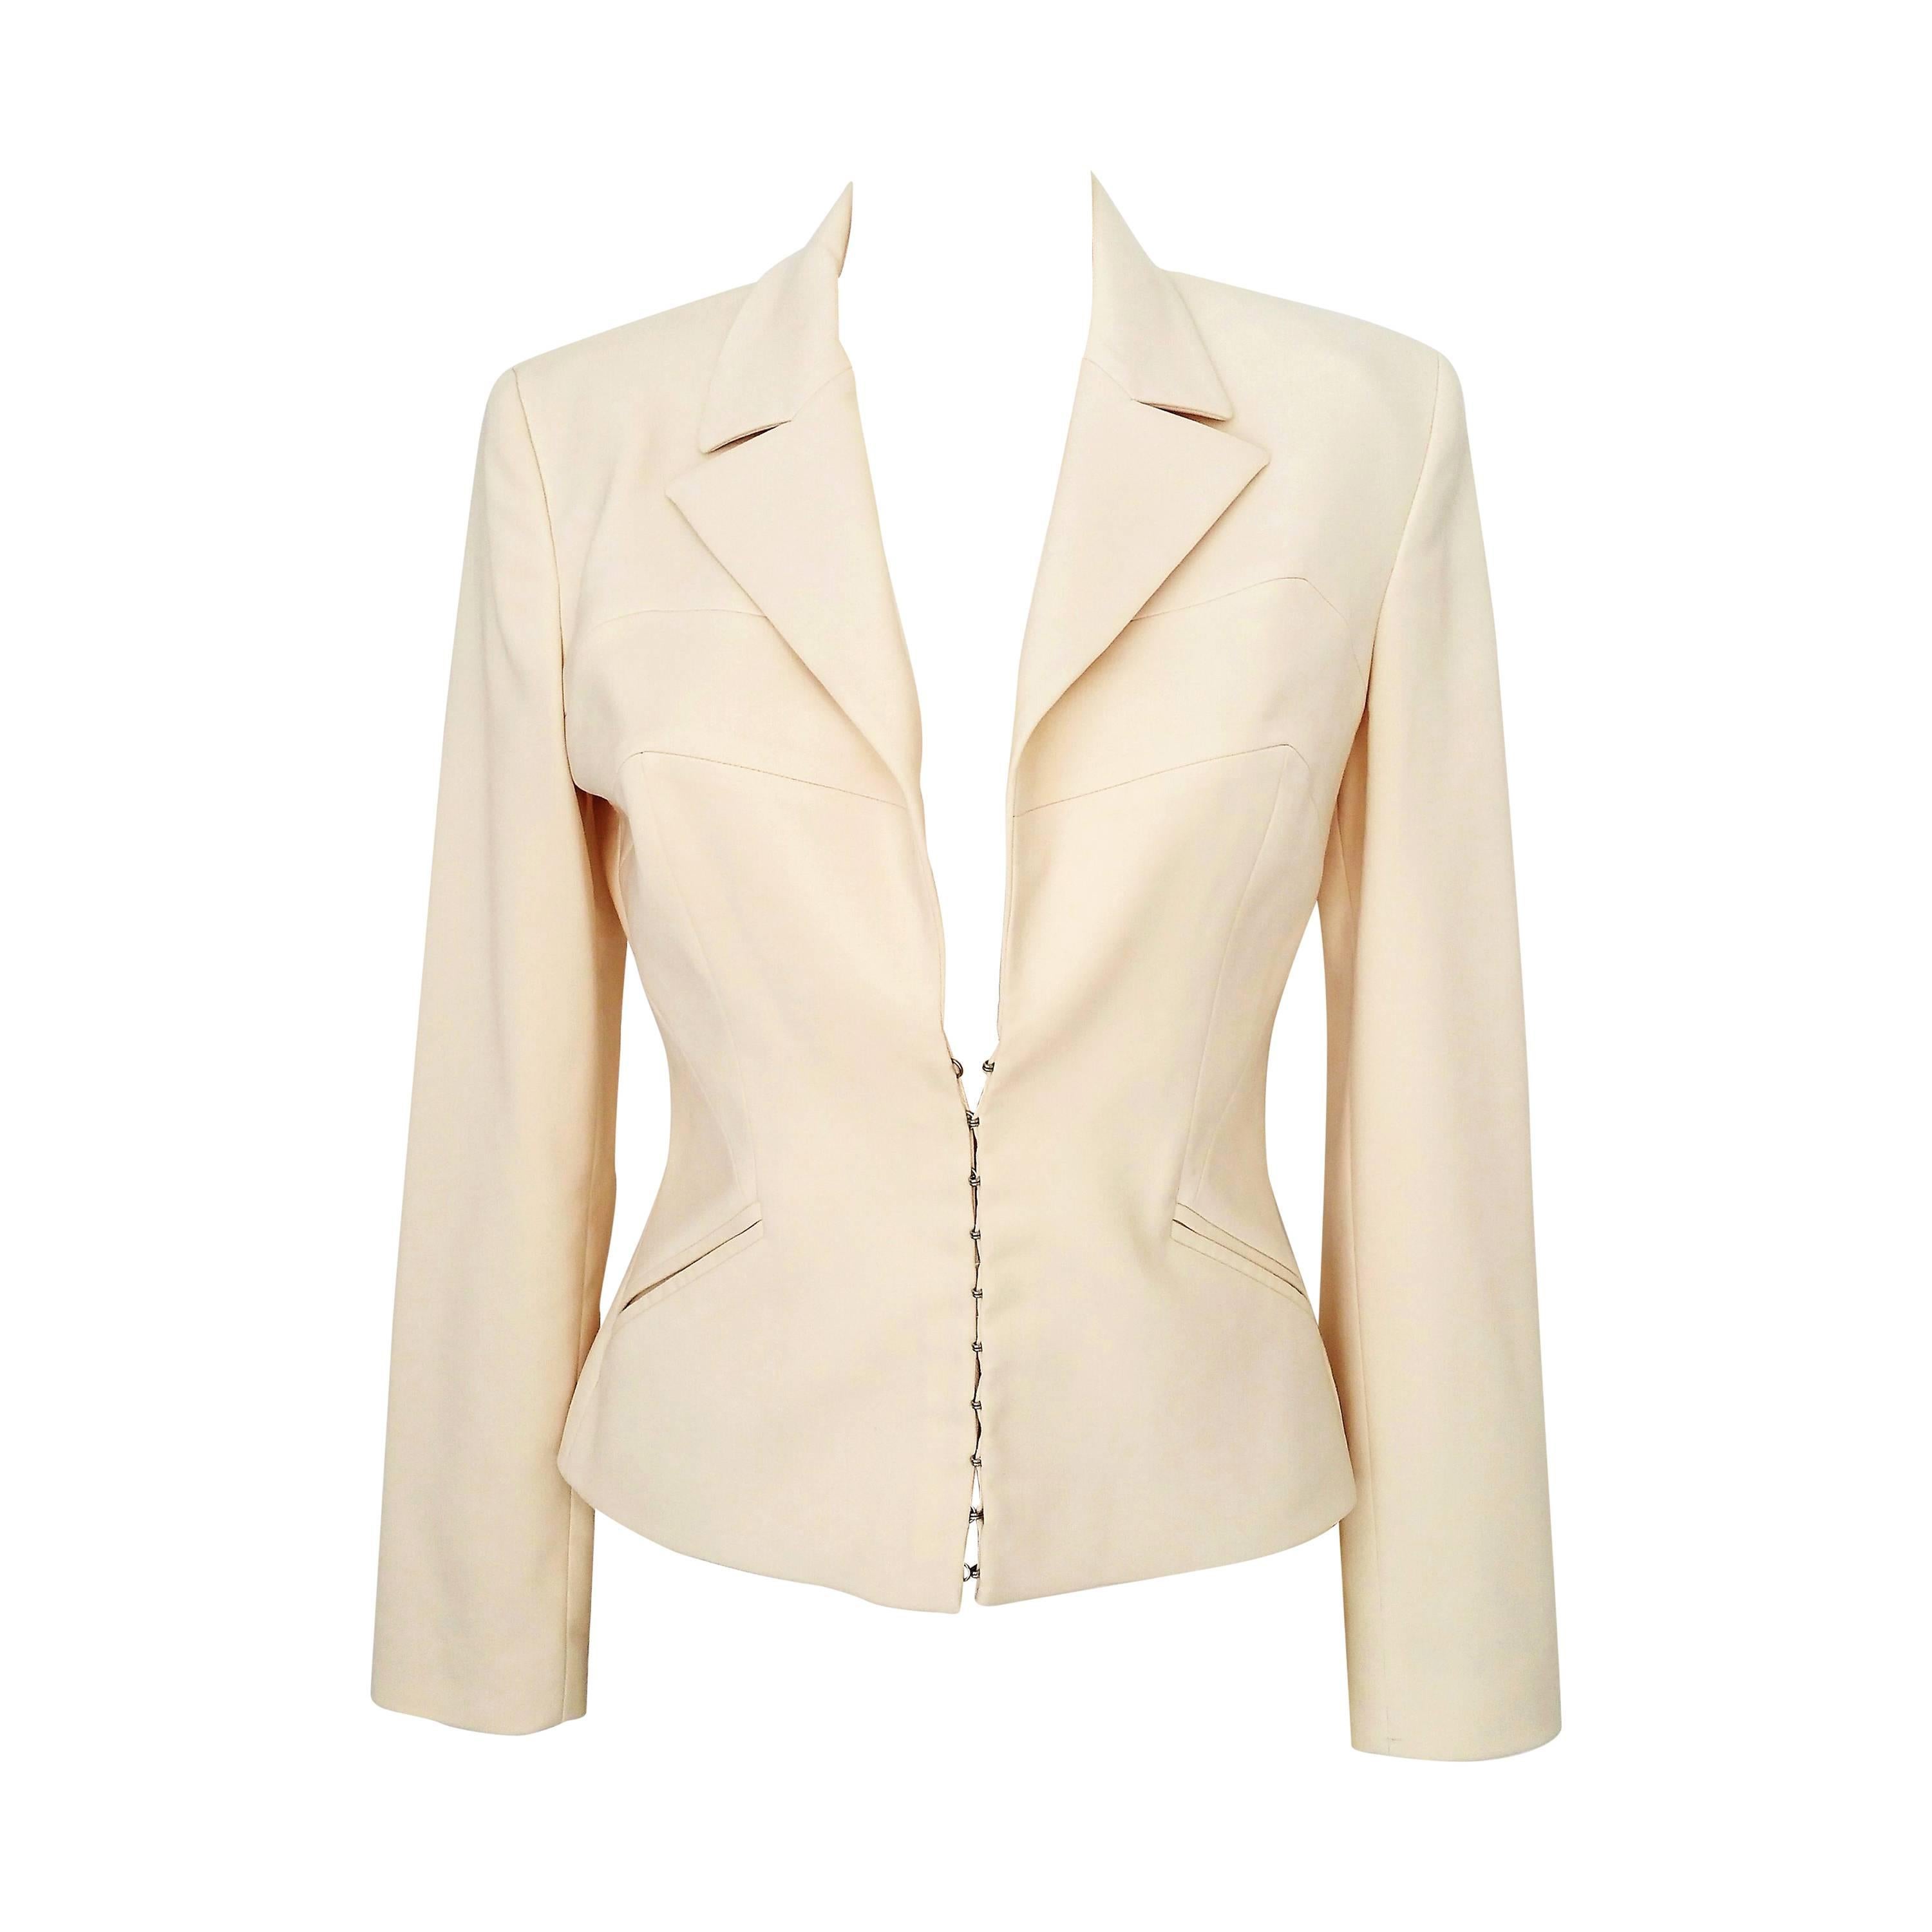 1990s Gianni Versace cream jacket For Sale